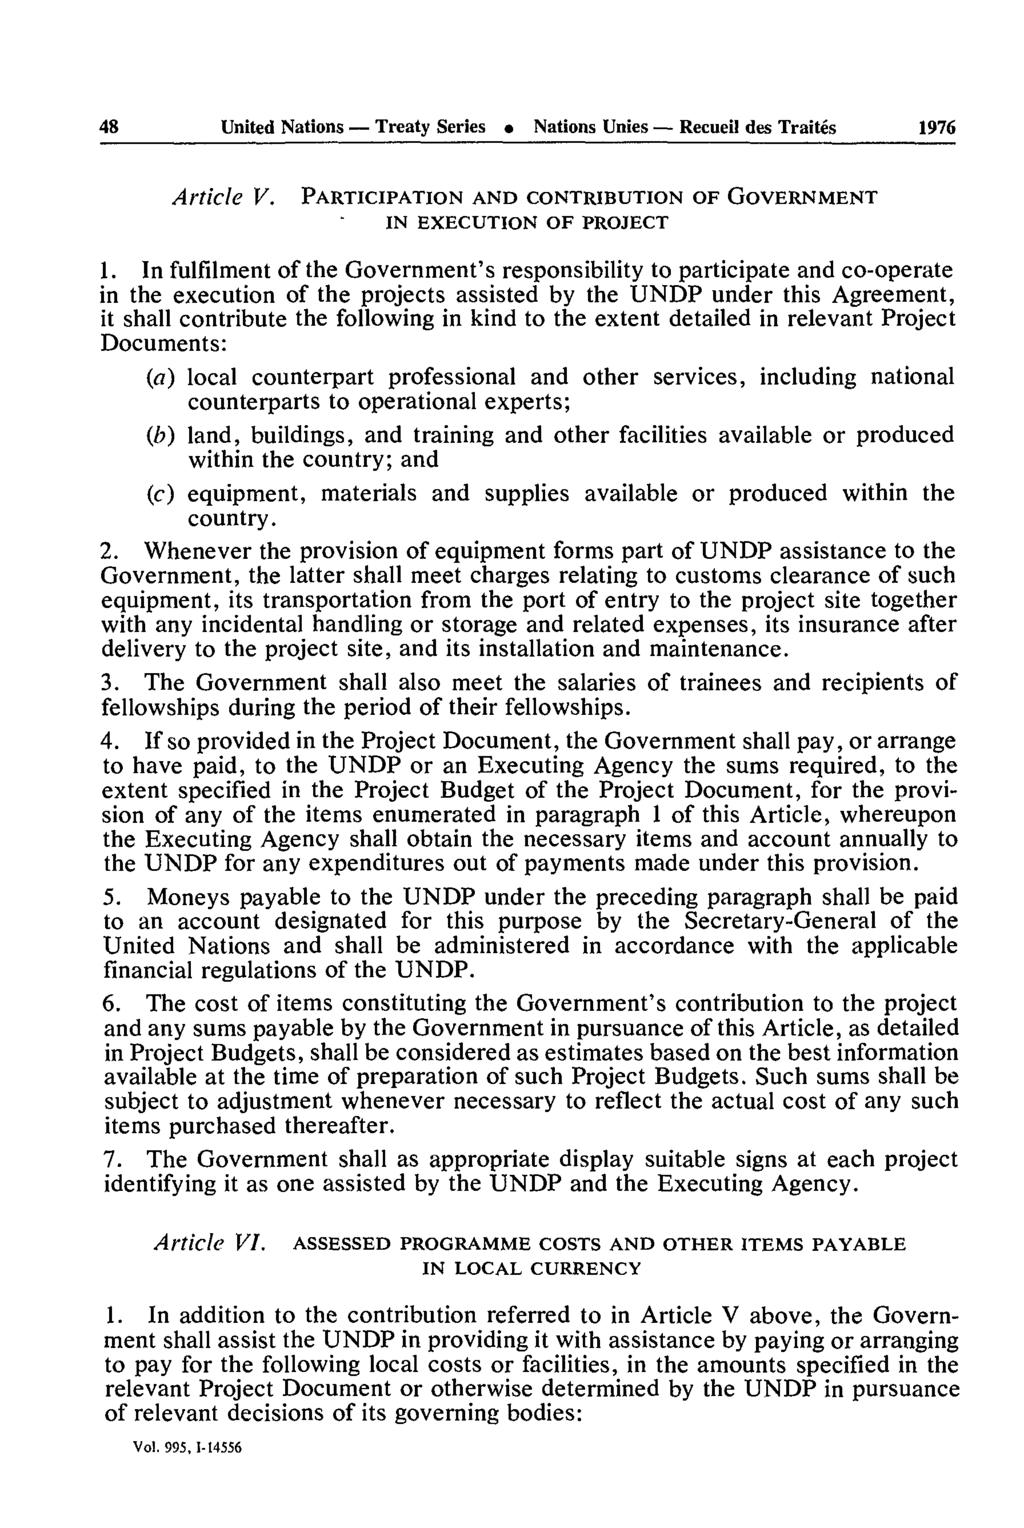 48 United Nations Treaty Series Nations Unies Recueil des Traités 1976 Article V. PARTICIPATION AND CONTRIBUTION OF GOVERNMENT IN EXECUTION OF PROJECT 1.